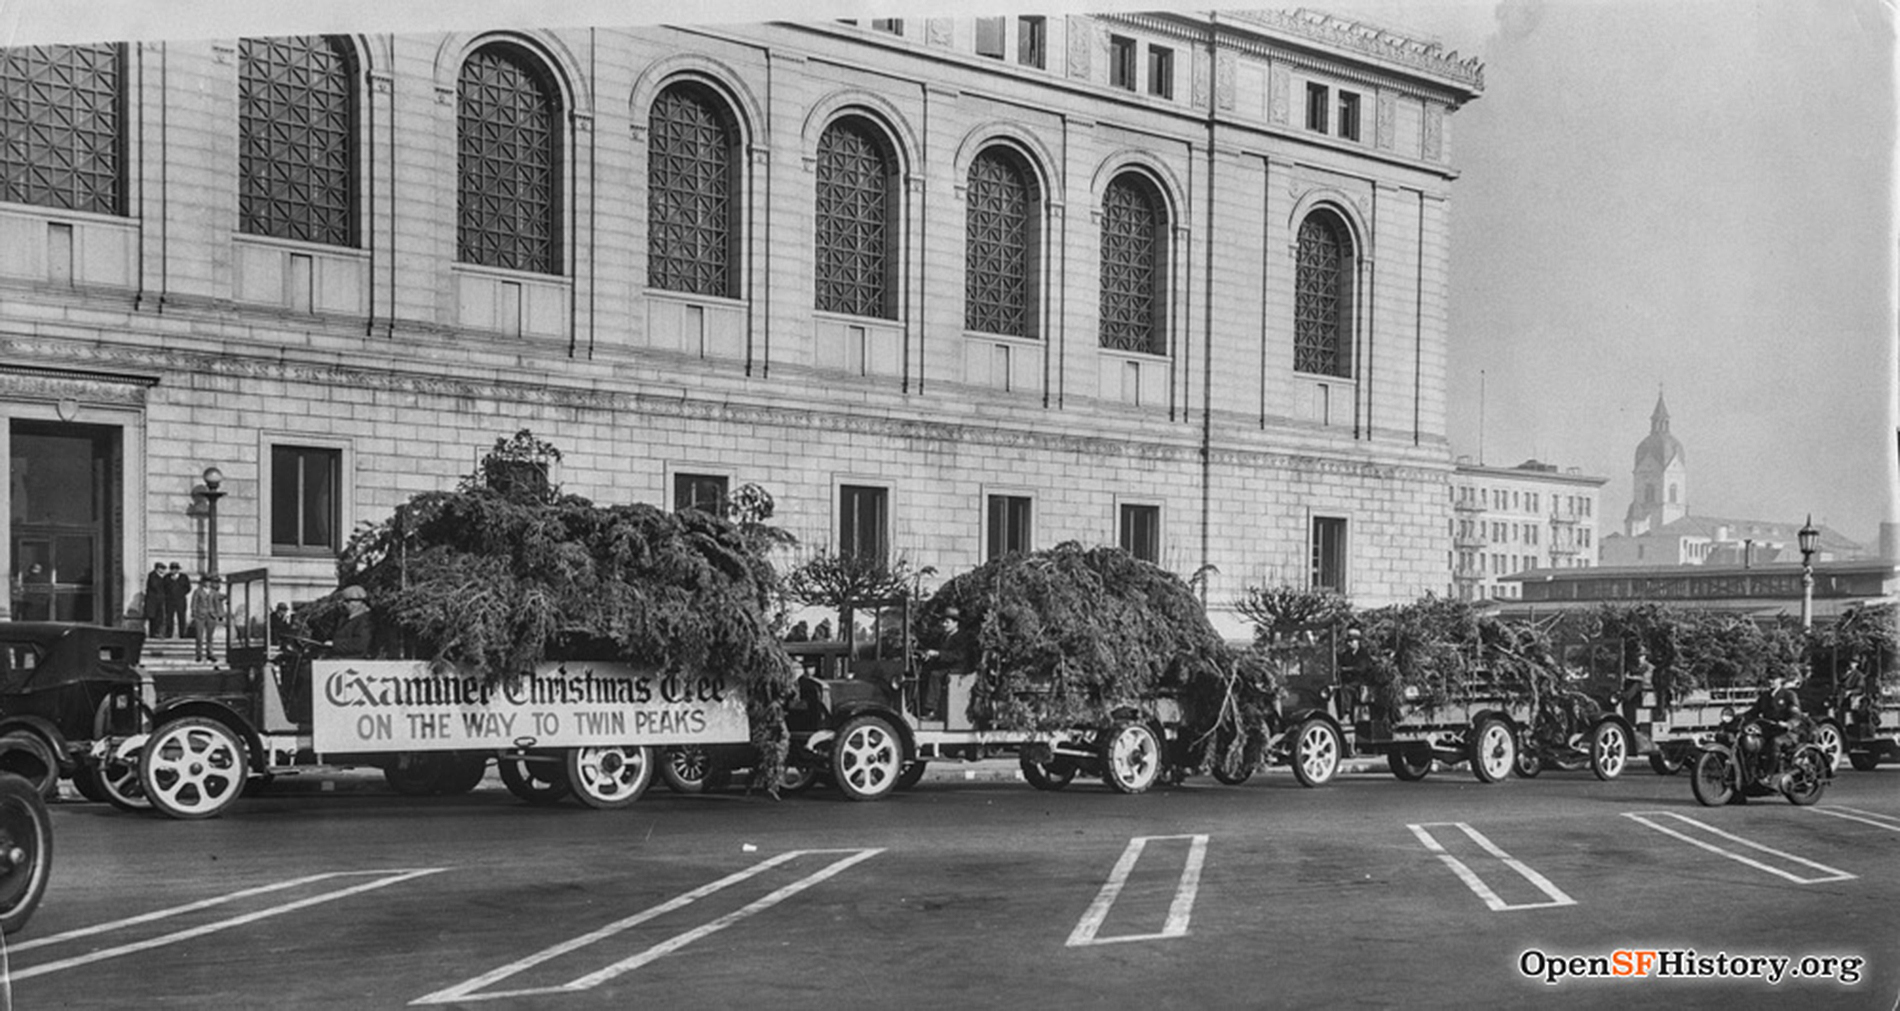 Trucks loaded with sections of a tree are seen in a caravan outside a neoclassical library.